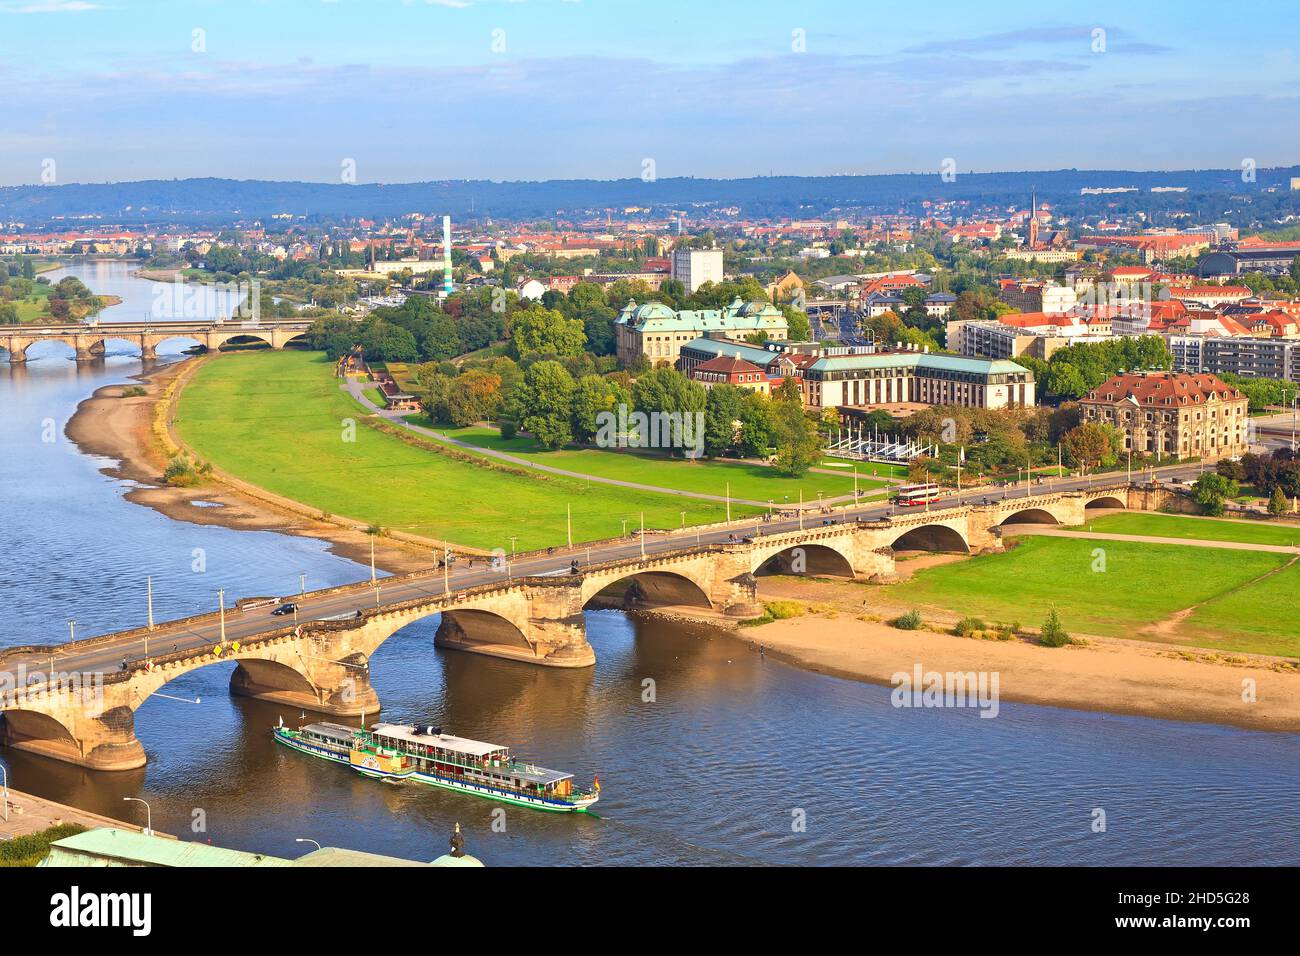 Dresden Saxony Germany. View of the Carolabrücke and Elbe River, Stock Photo